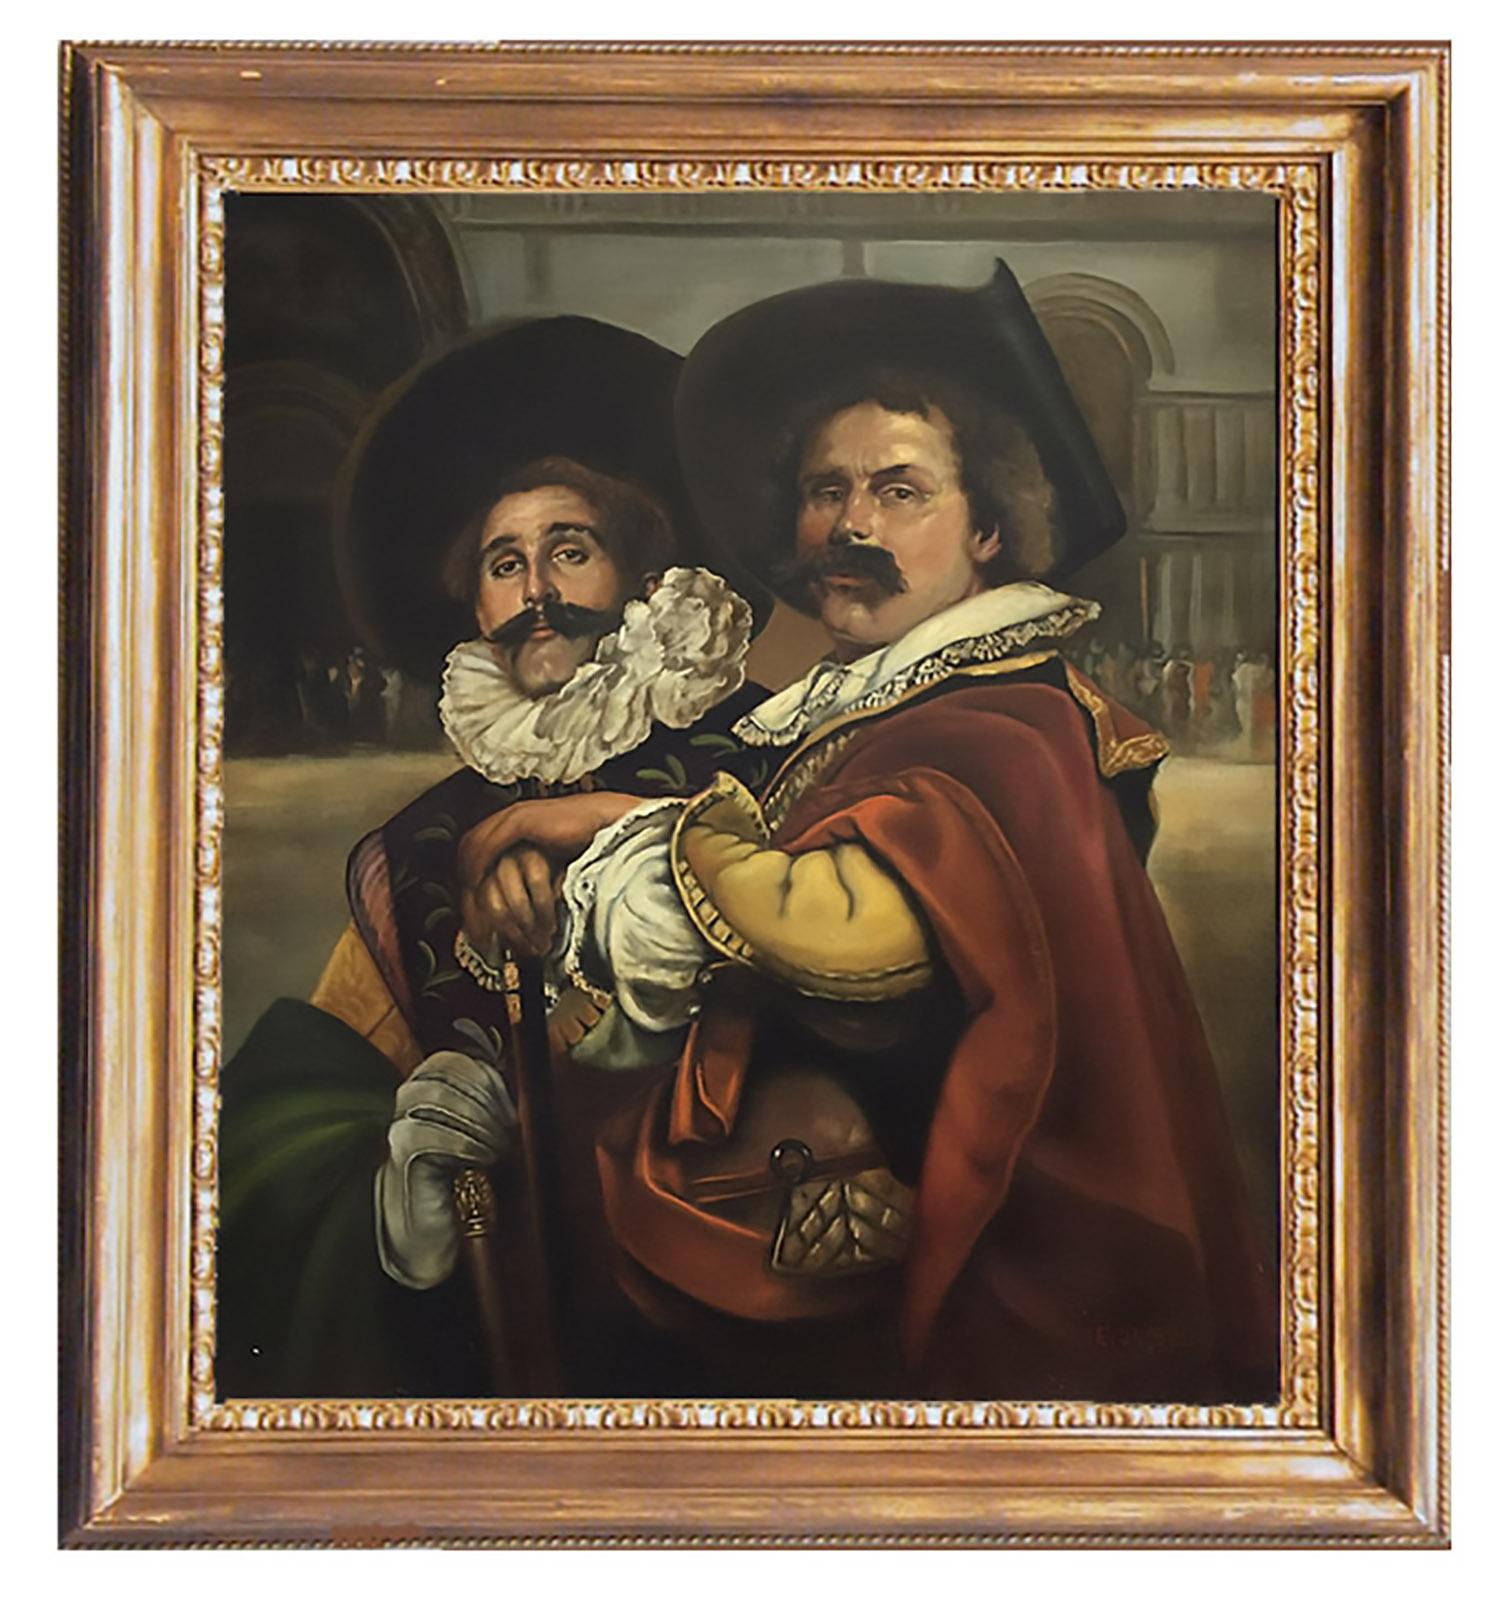 Eugenio De Blasi Figurative Painting - MUSKETEERS -  French School - Figurative - Italian Oil on Canvas Painting